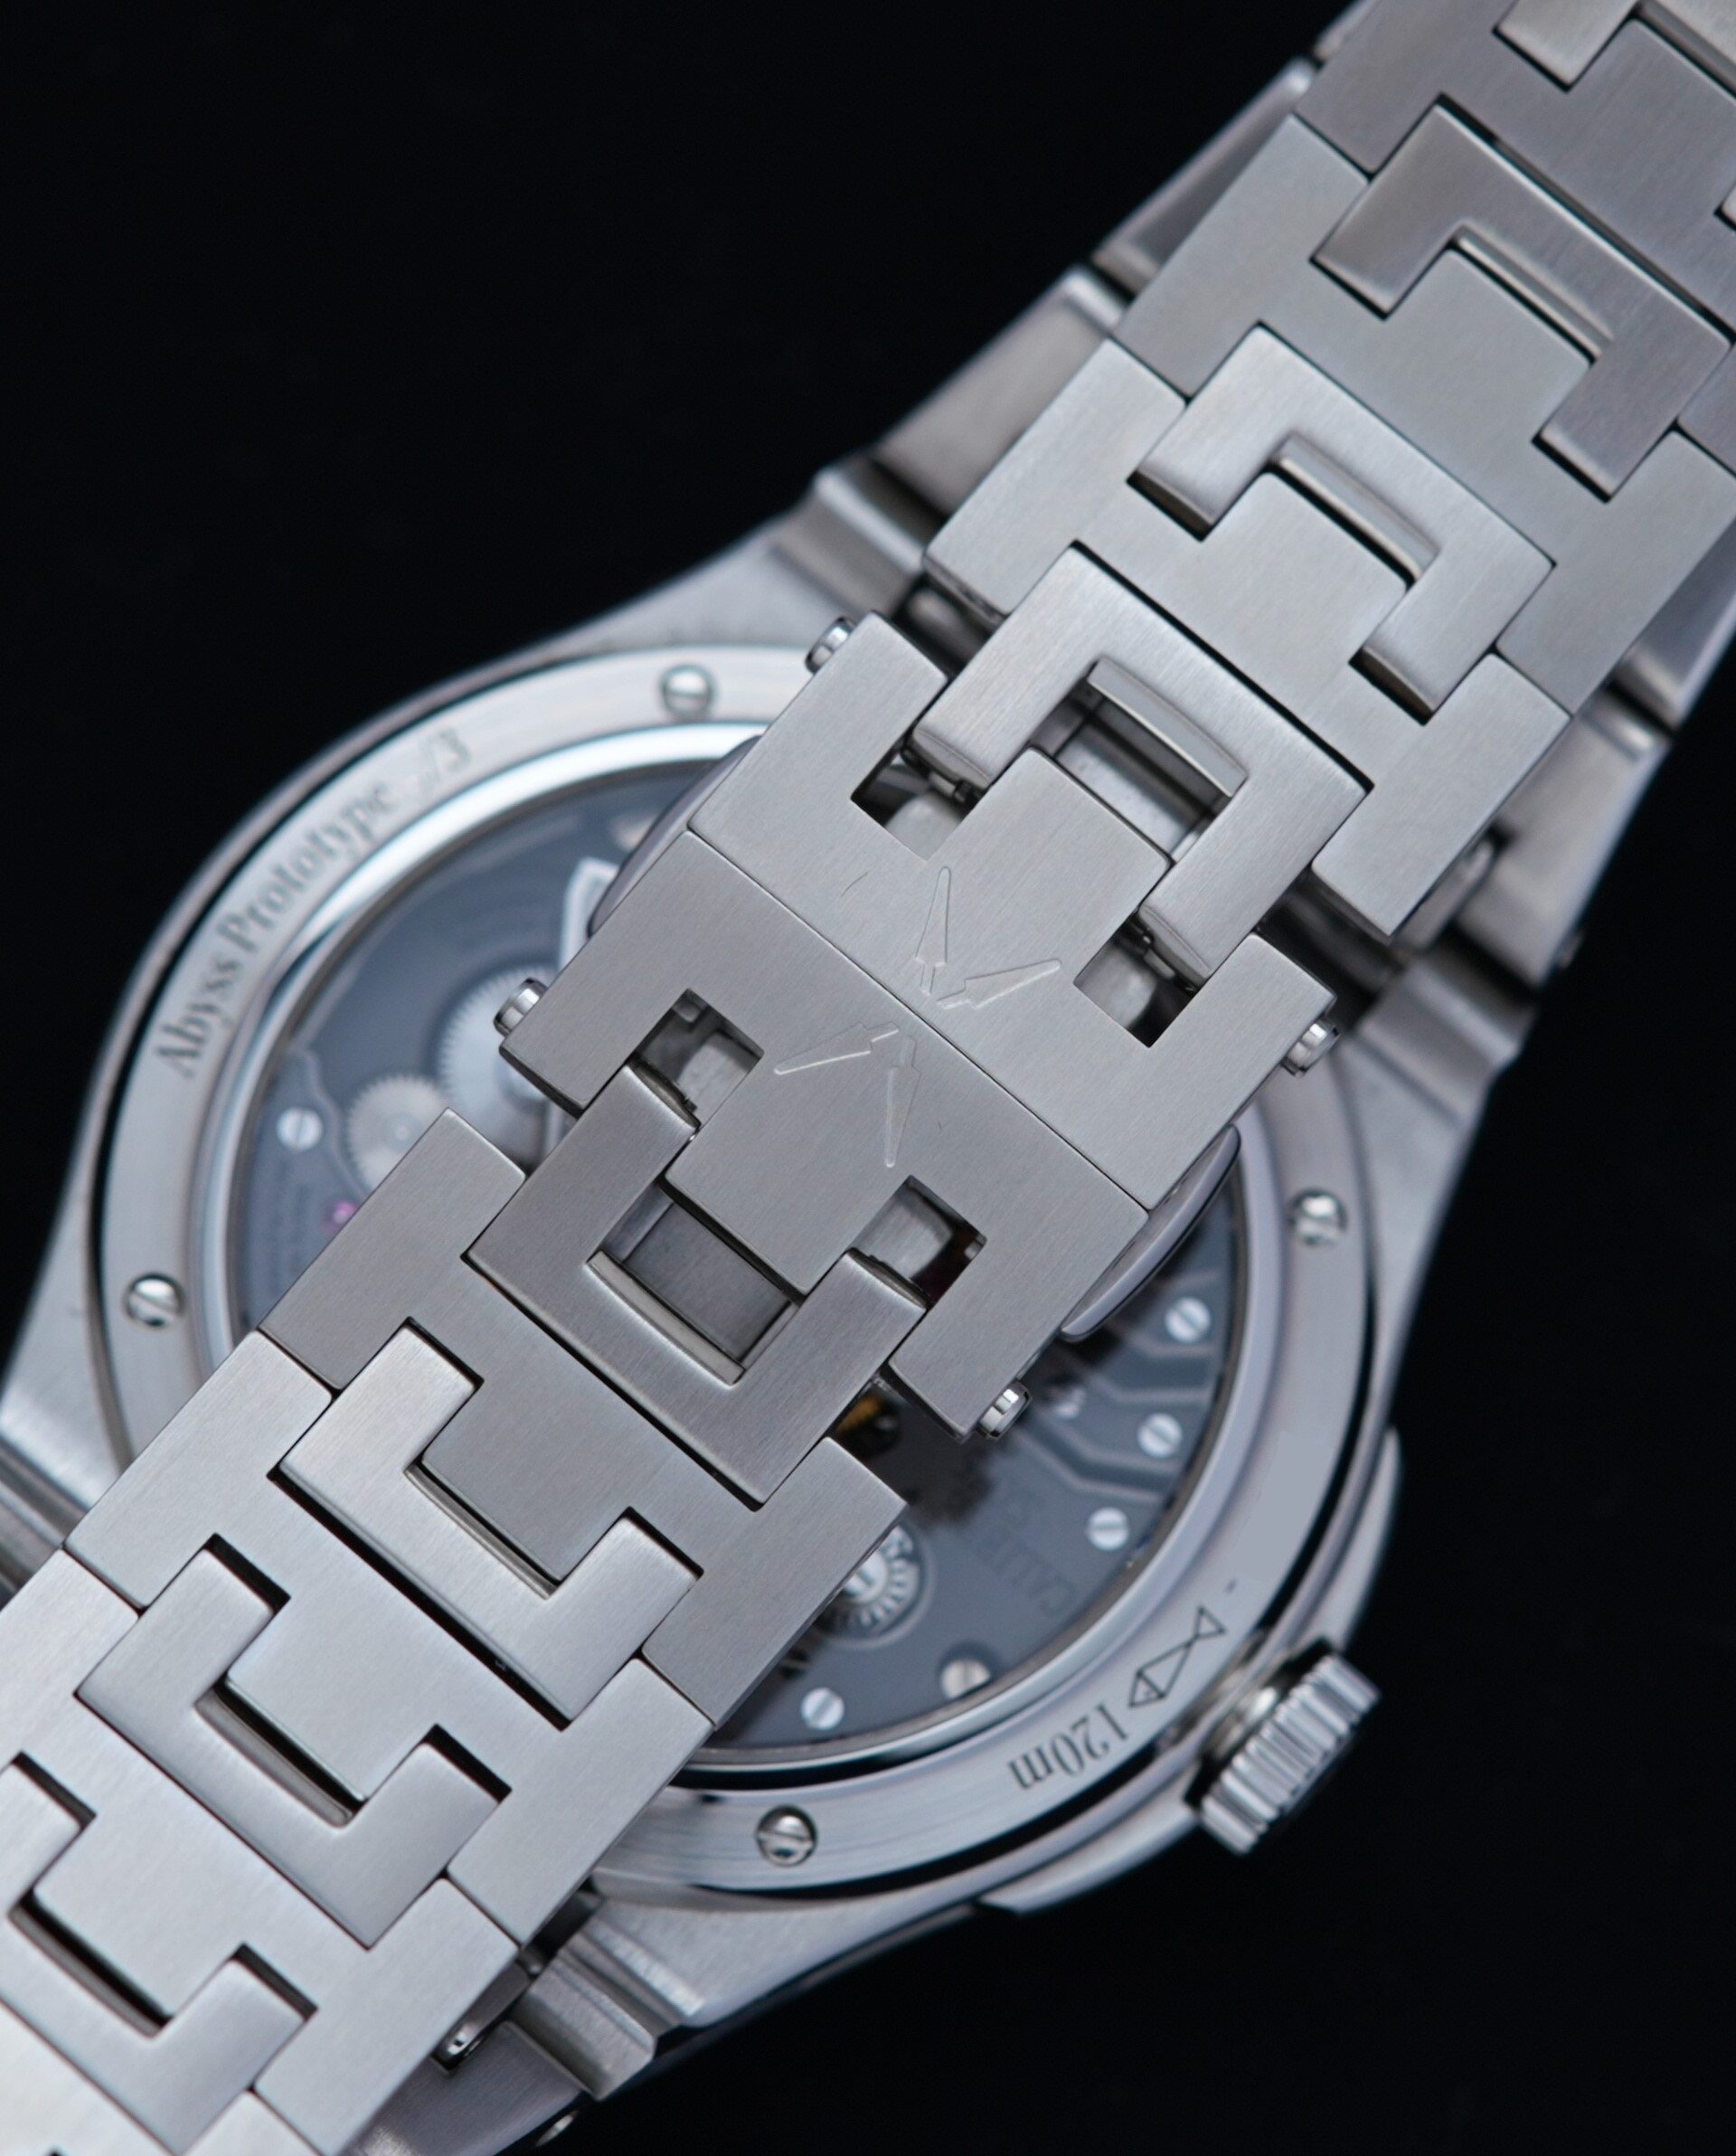 Bracelet and back side of the Antarctique Abyss PROTOTYPE watch.